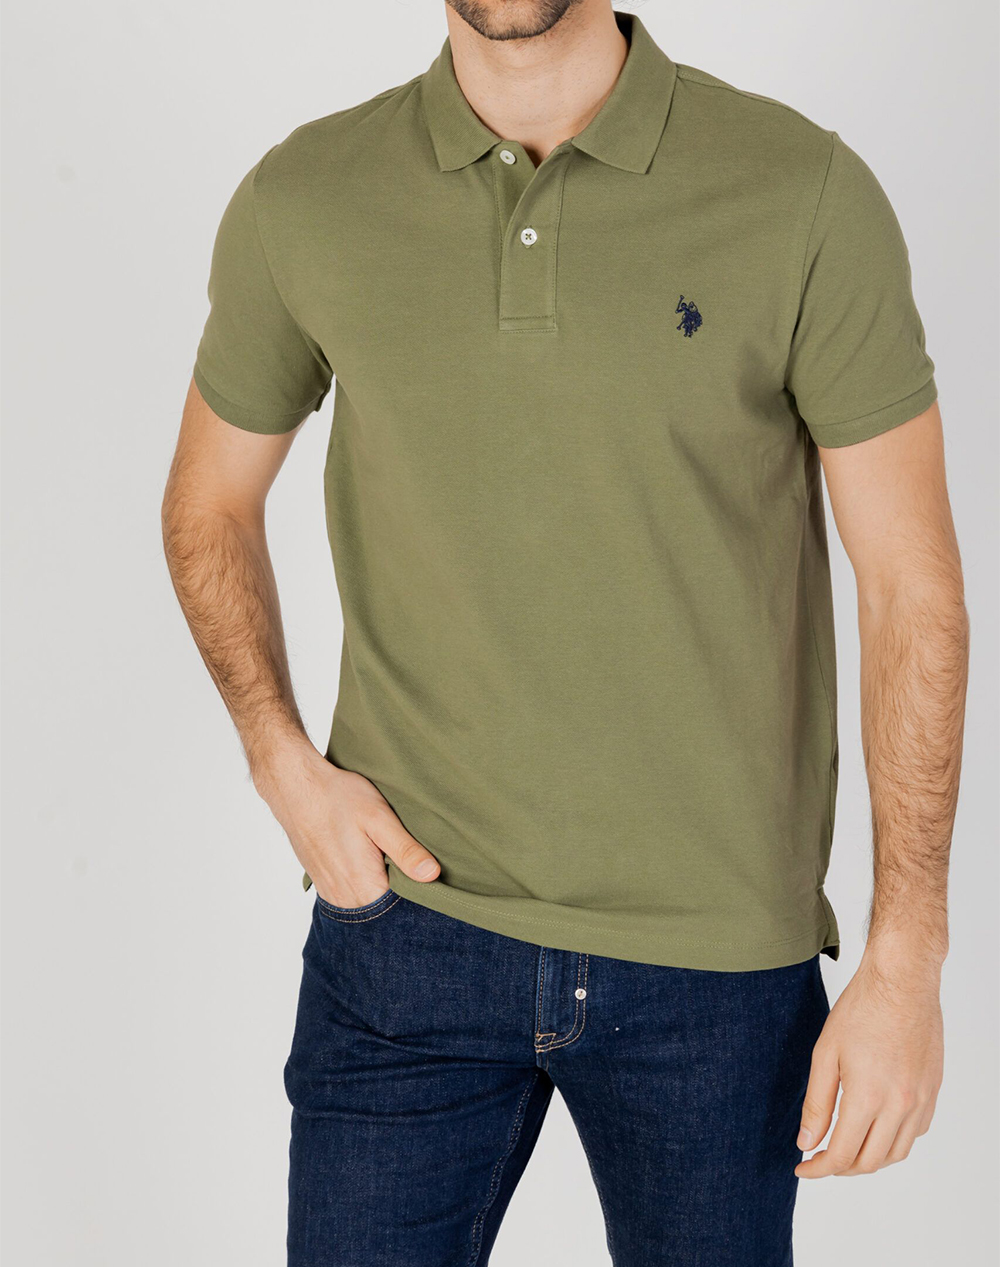 US POLO ASSN KING 41029 EHPD POLO PACK OF 400 ΜΠΛΟΥΖΑ ΑΝΔΡΙΚΟ 6735541029P400-314 Olive 3820A0USP3400003_XR29004